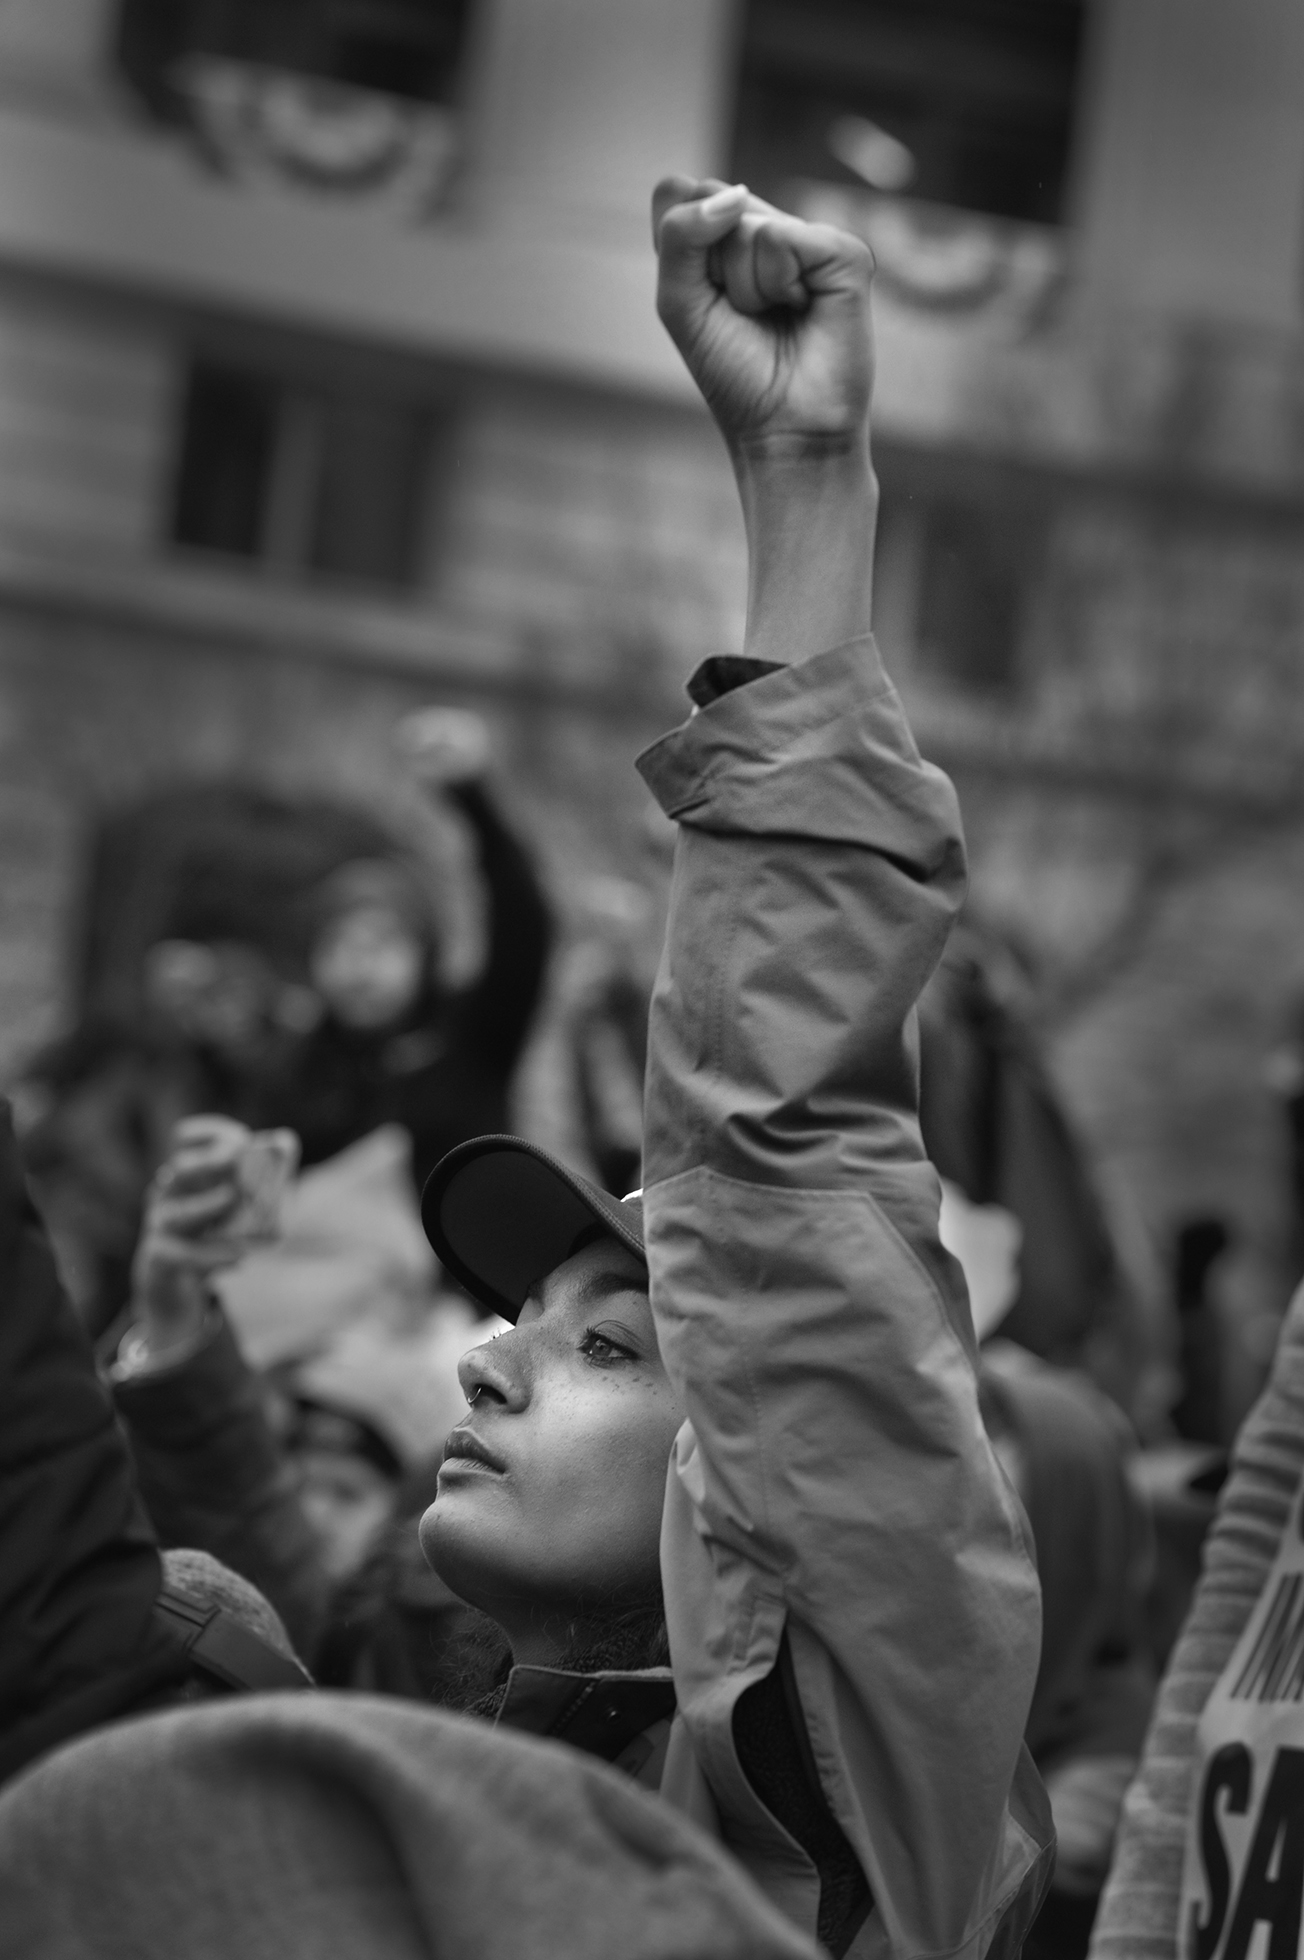 A determined looking woman facing left, protesting in a crowd on the street, with her left arm raised with her hand in a fist, wearing a baseball cap and jacket.